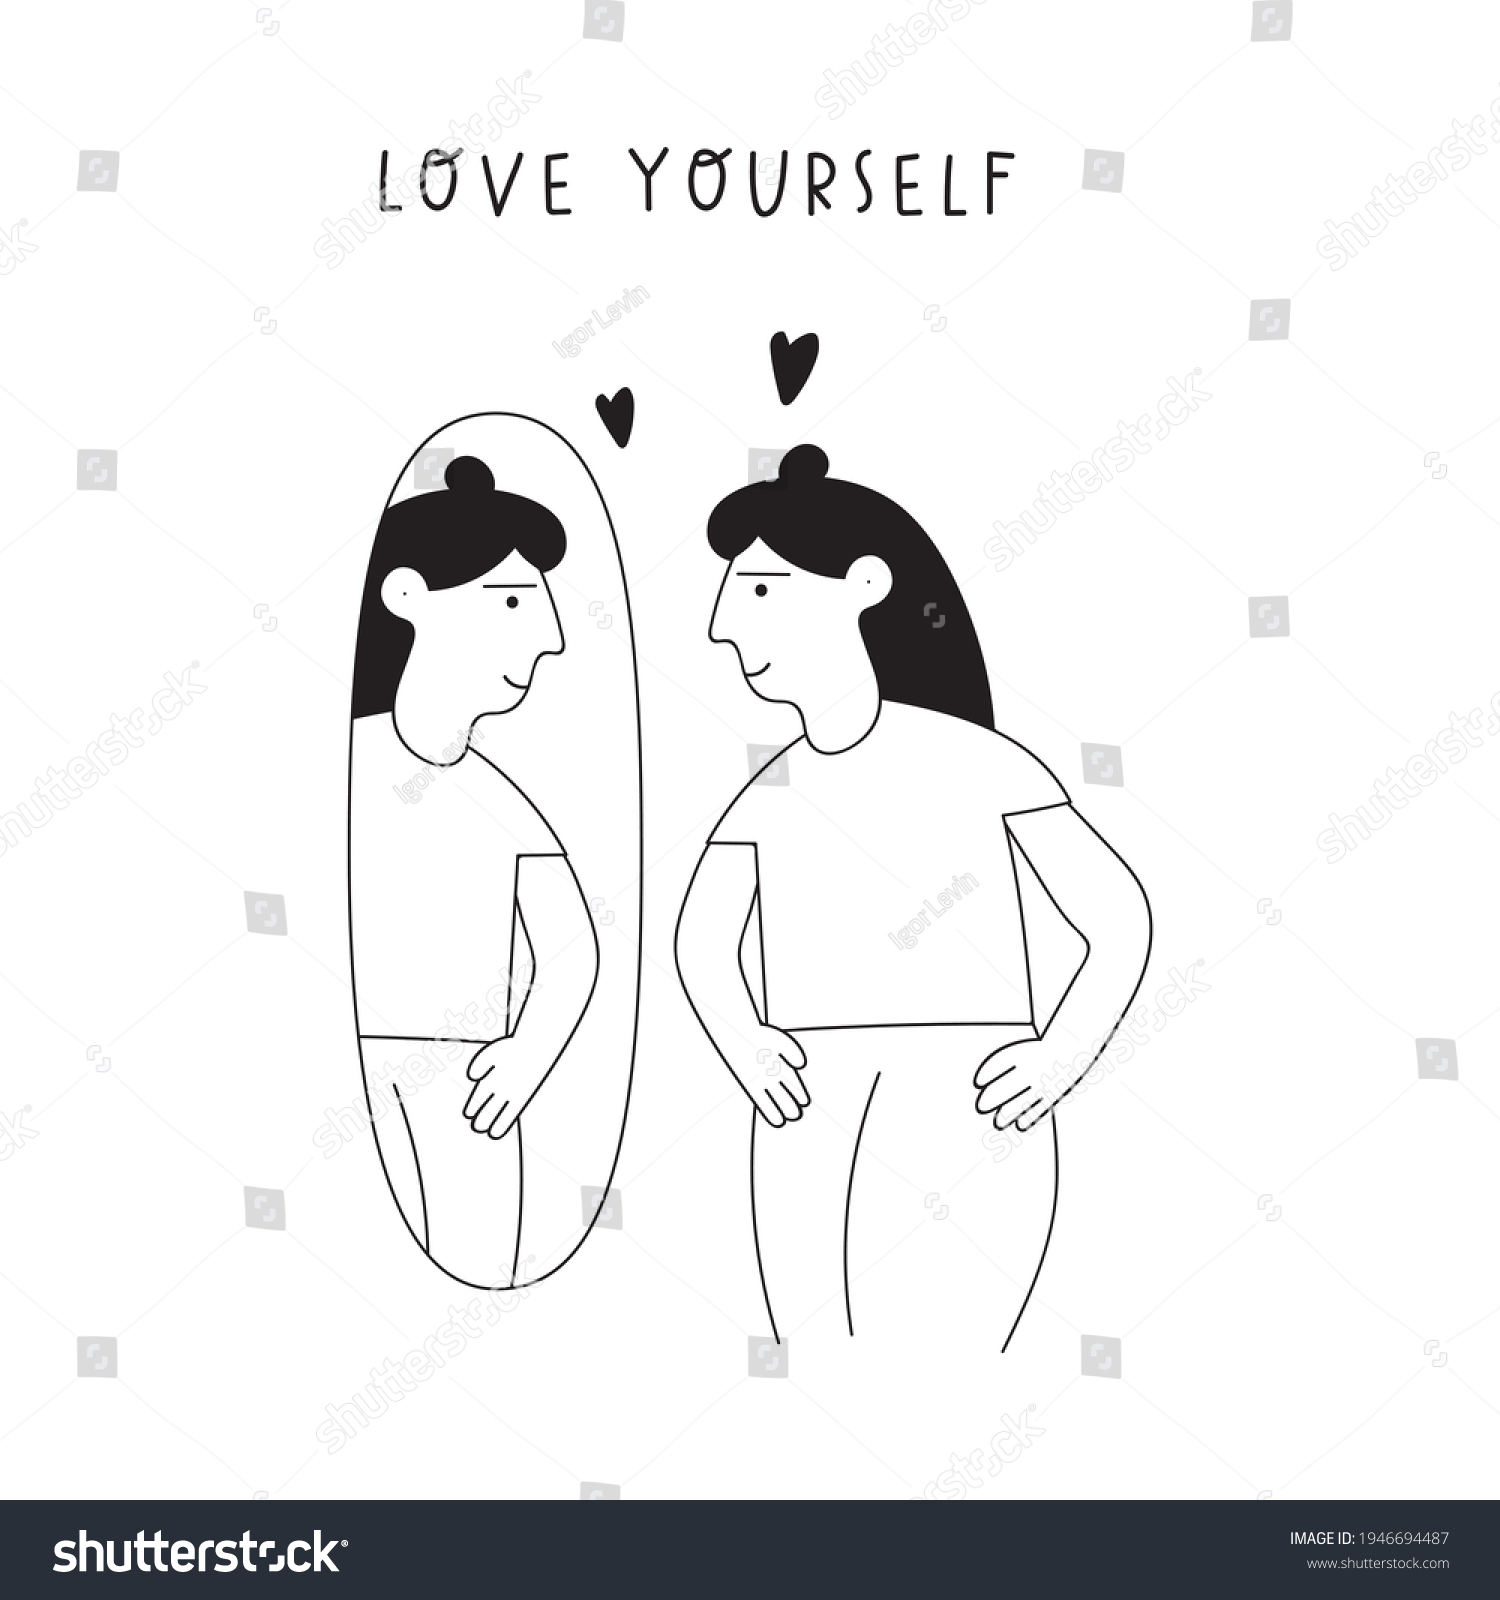 SVG of Female standing before mirror and smiling to herself. Love yourself. Outline vector illustration on white background. svg